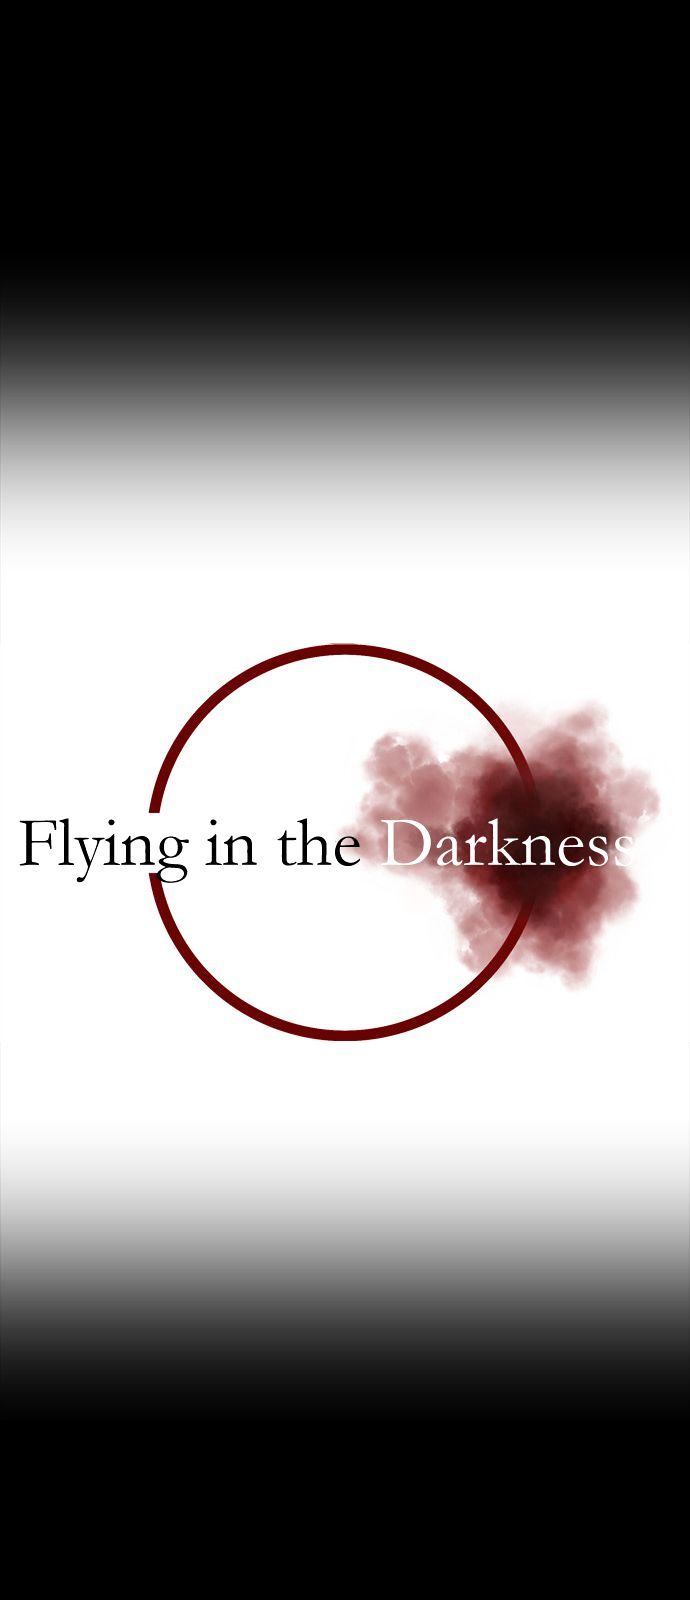 flying_in_the_darkness_5_5